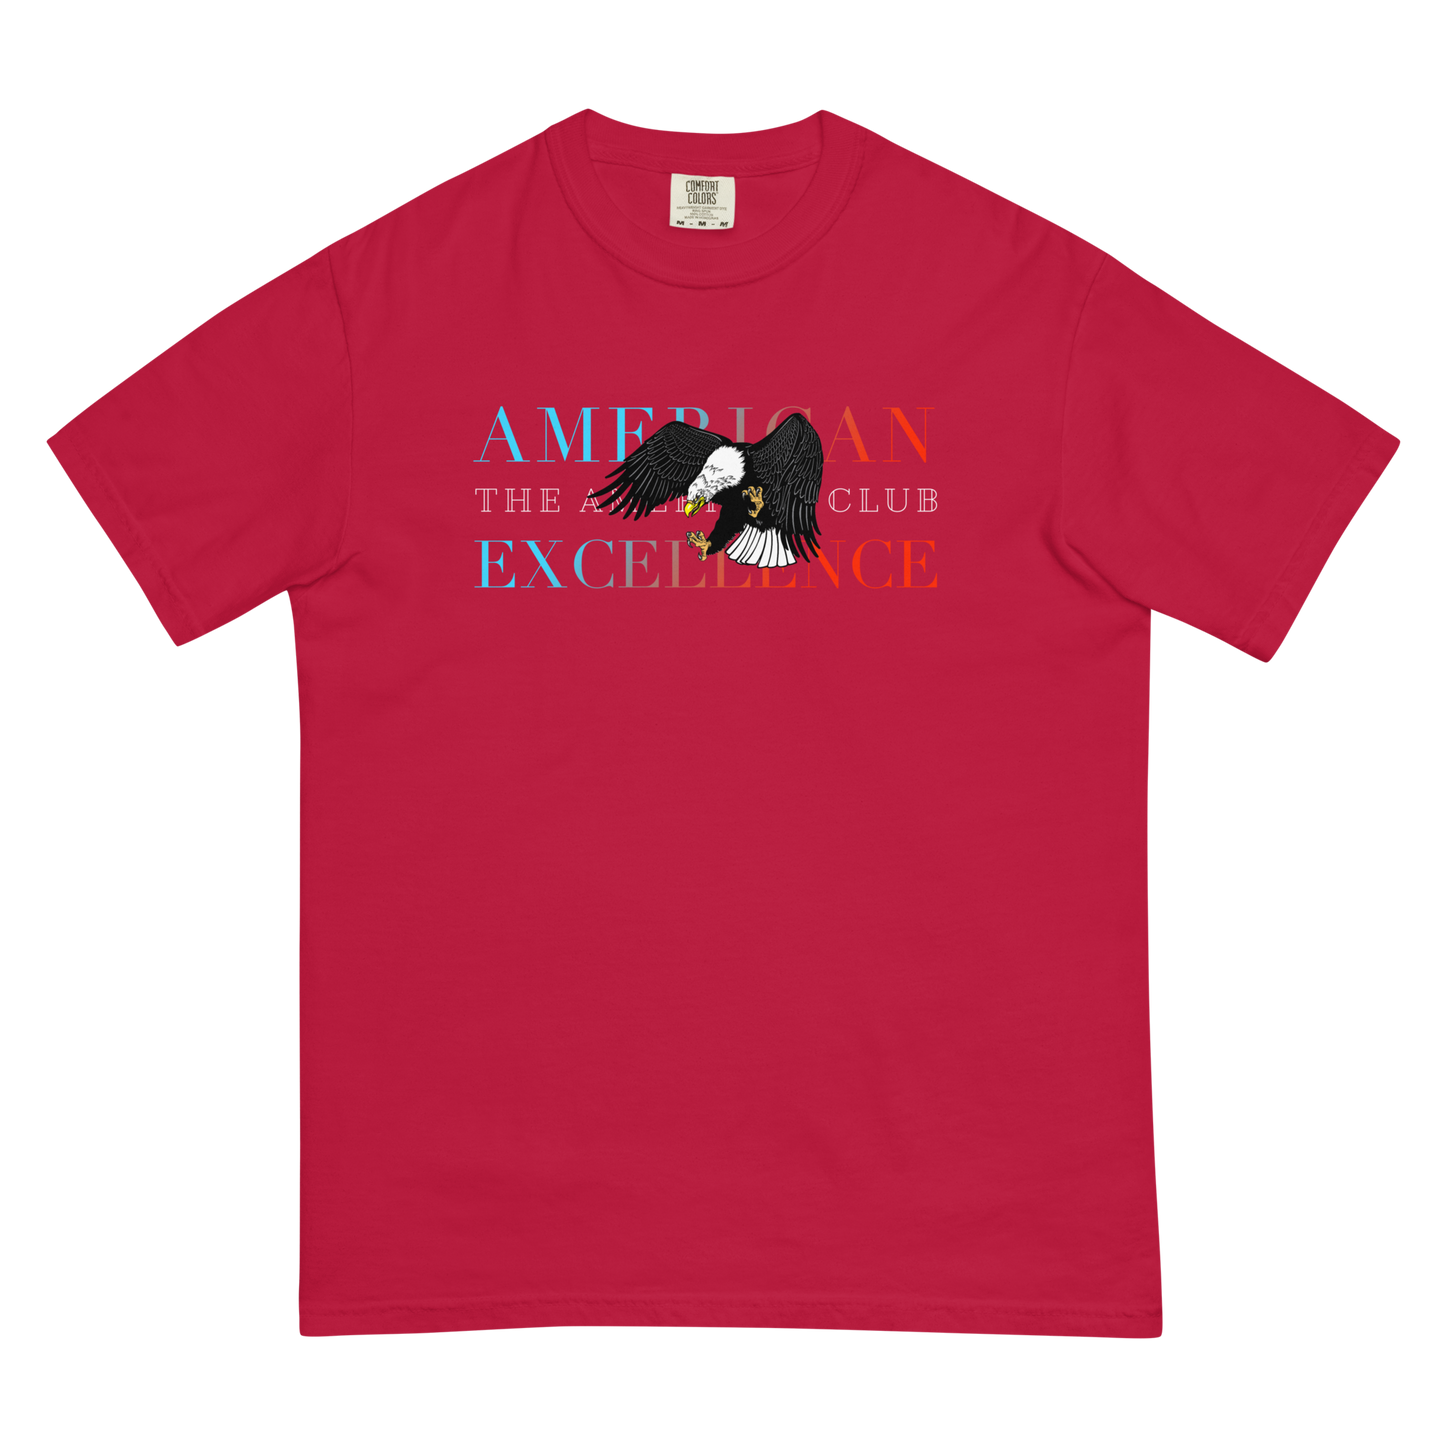 American Excellence Shirt